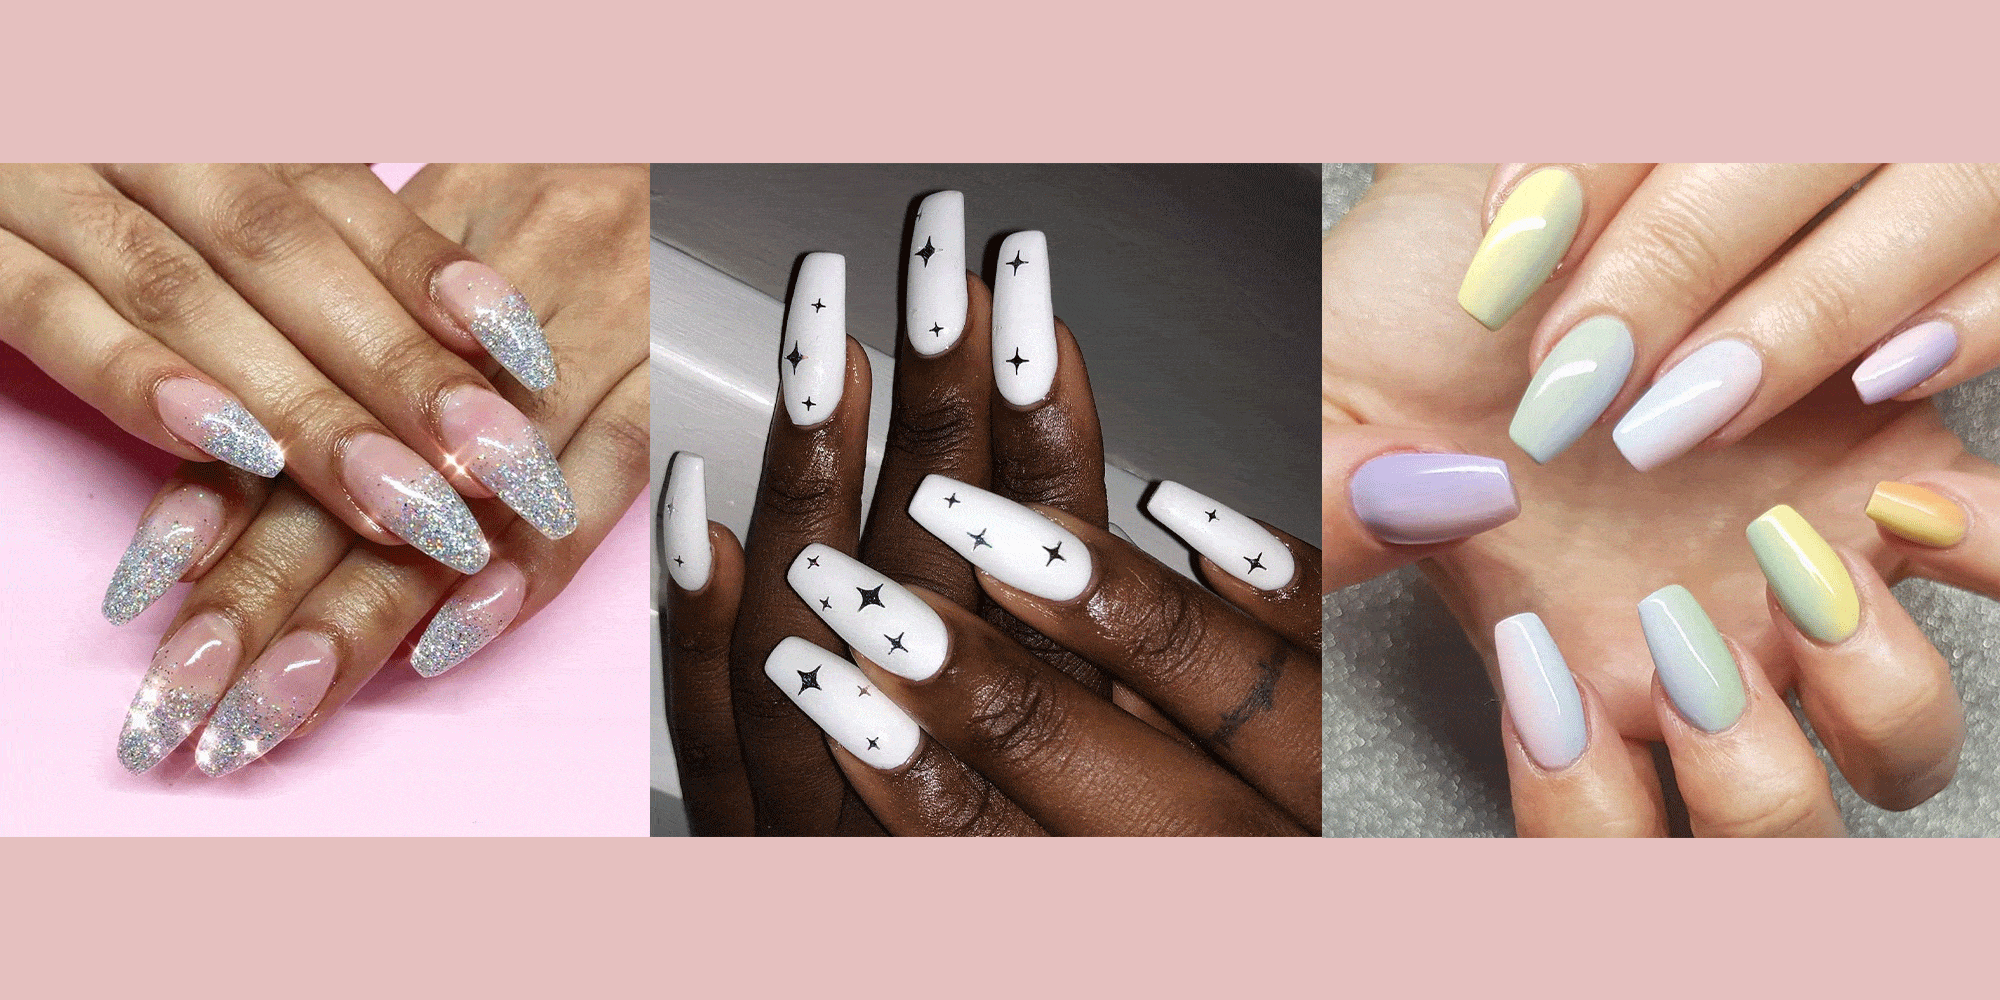 Different Nail Shapes, Explained: Which Is Best For You?